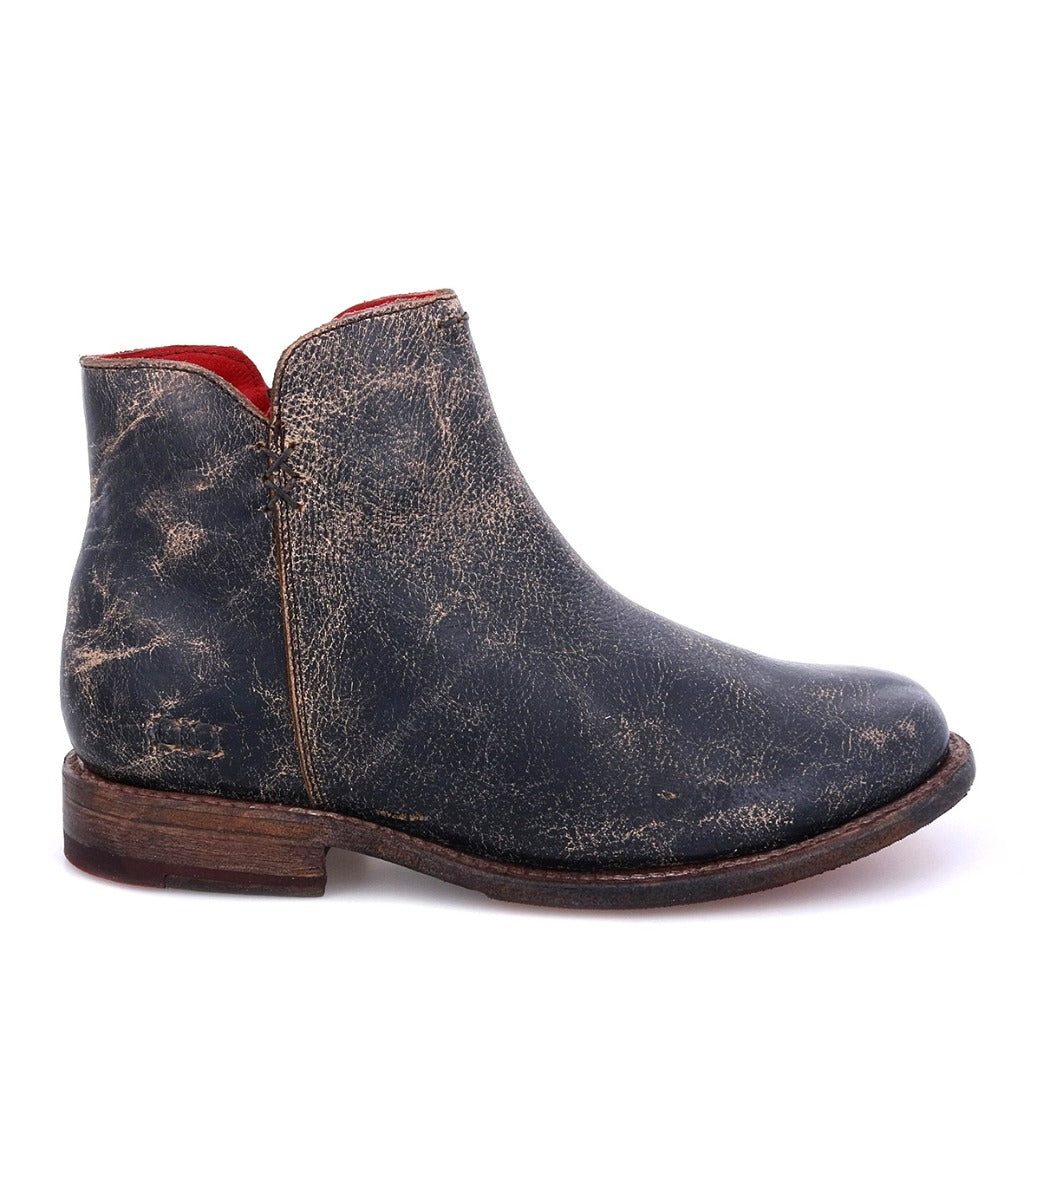 A women's Yurisa black leather ankle boot with a red sole from Bed Stu.